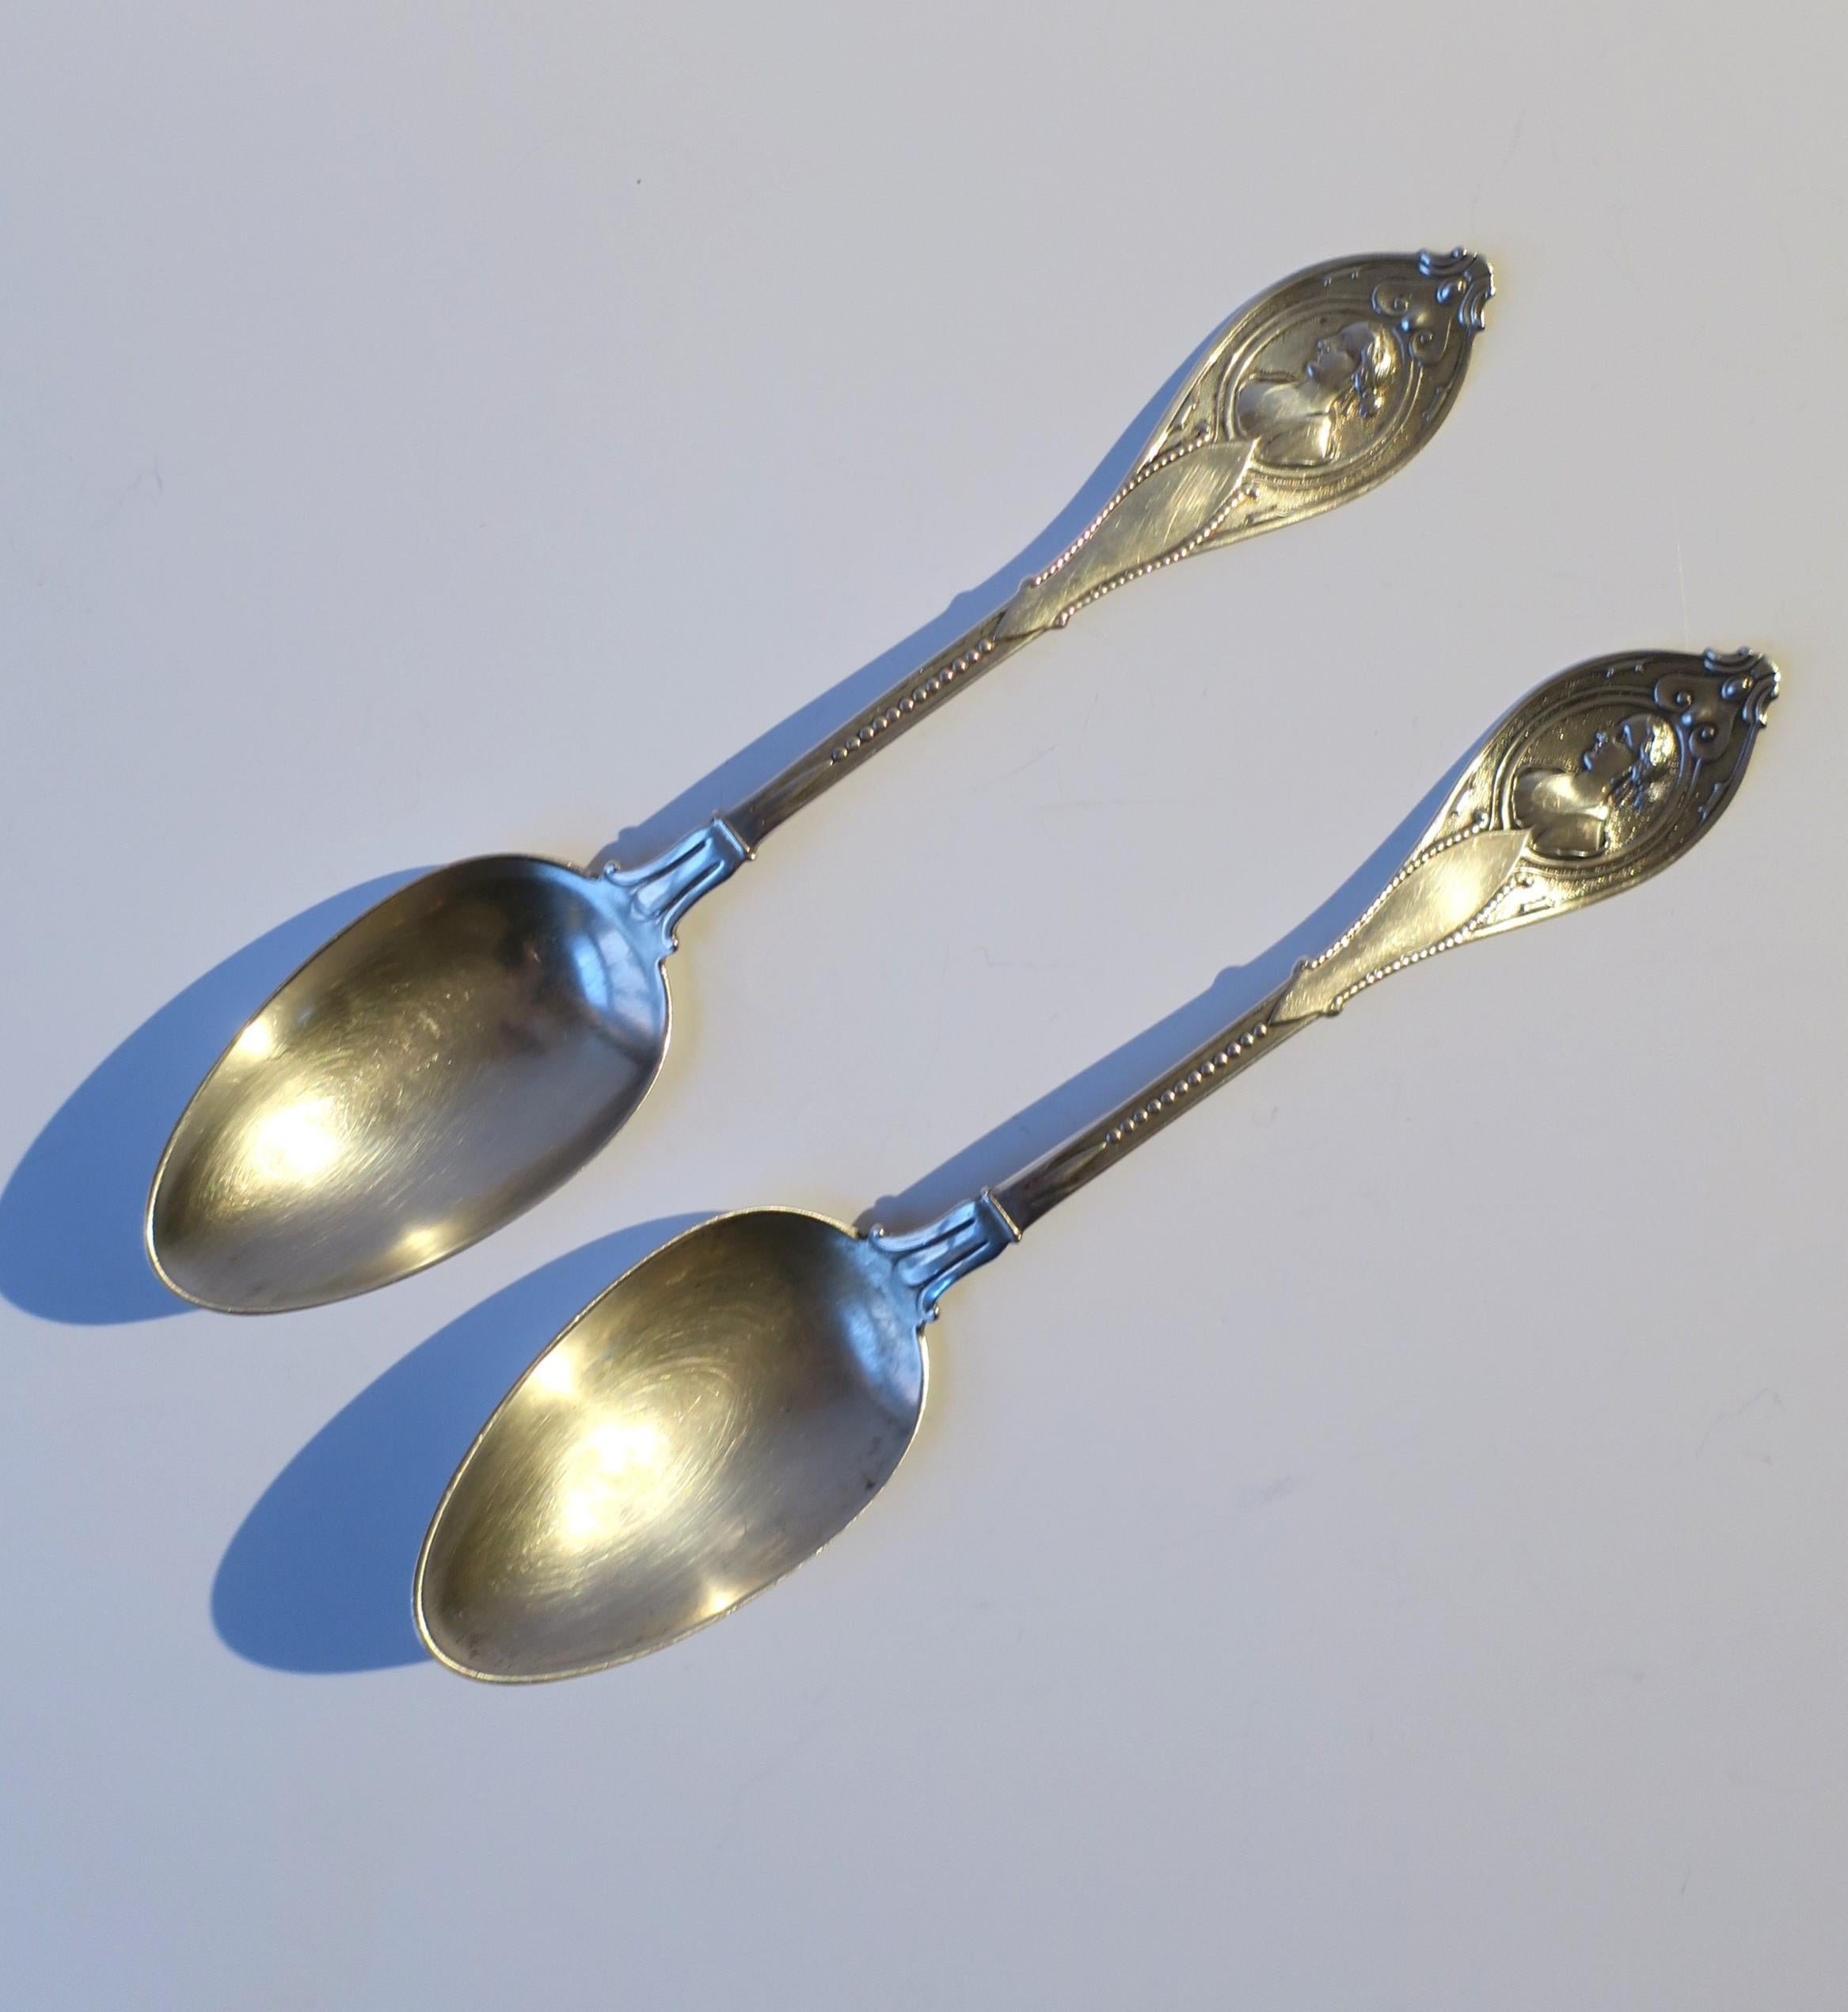 A beautiful antique American coin silver serving spoon set by J H Heller & Son, circa late-19th century, USA. Set is in the Victorian design style with hints of Art Nouveau on back of spoon as shown in images. Spoons are a matching set with great